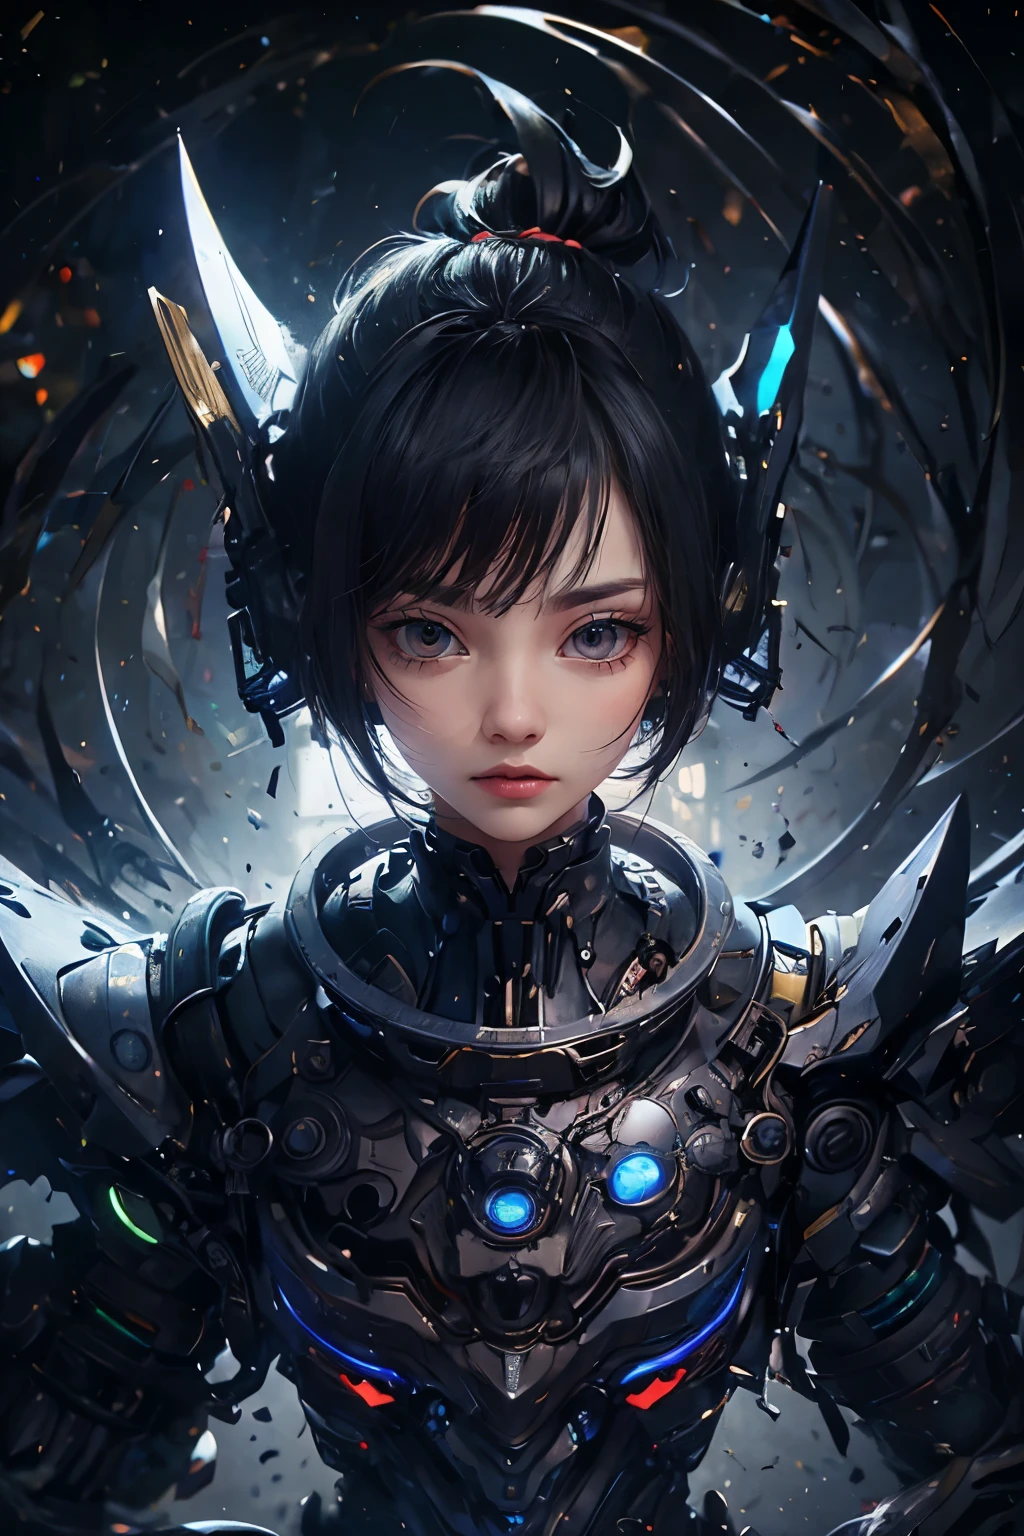 CG Mecha, Beautiful Eyes, ((Two people))、Upper Body, （Mechanic Armor）、40ＭＭPhotographed with a lens, Portraiture,jet suit、fly in the sky、patrol、 official、perfection、Neon Light, 8K, born, highest quality, Tabletop, 超A high resolution, colorful, (medium wide shot), (Dynamic Perspective), Sharp focus , (Depth of written boundary, bokeh:1.3), Highly detailed eyes and face,Ninja Artist, Beautiful fine details、iron, Trim Gear:1.2), ((Tabletop, highest quality)), Detailed Background, Inside the spaceship、Grab your weapon、（Gray Hair）、blue eyes、ponytail、Borne luminescence、Crescent Moon、Fantasy,masterpiece,Plug in、spectrum、confusion、Large robots、kaleidoscope、detailed gear